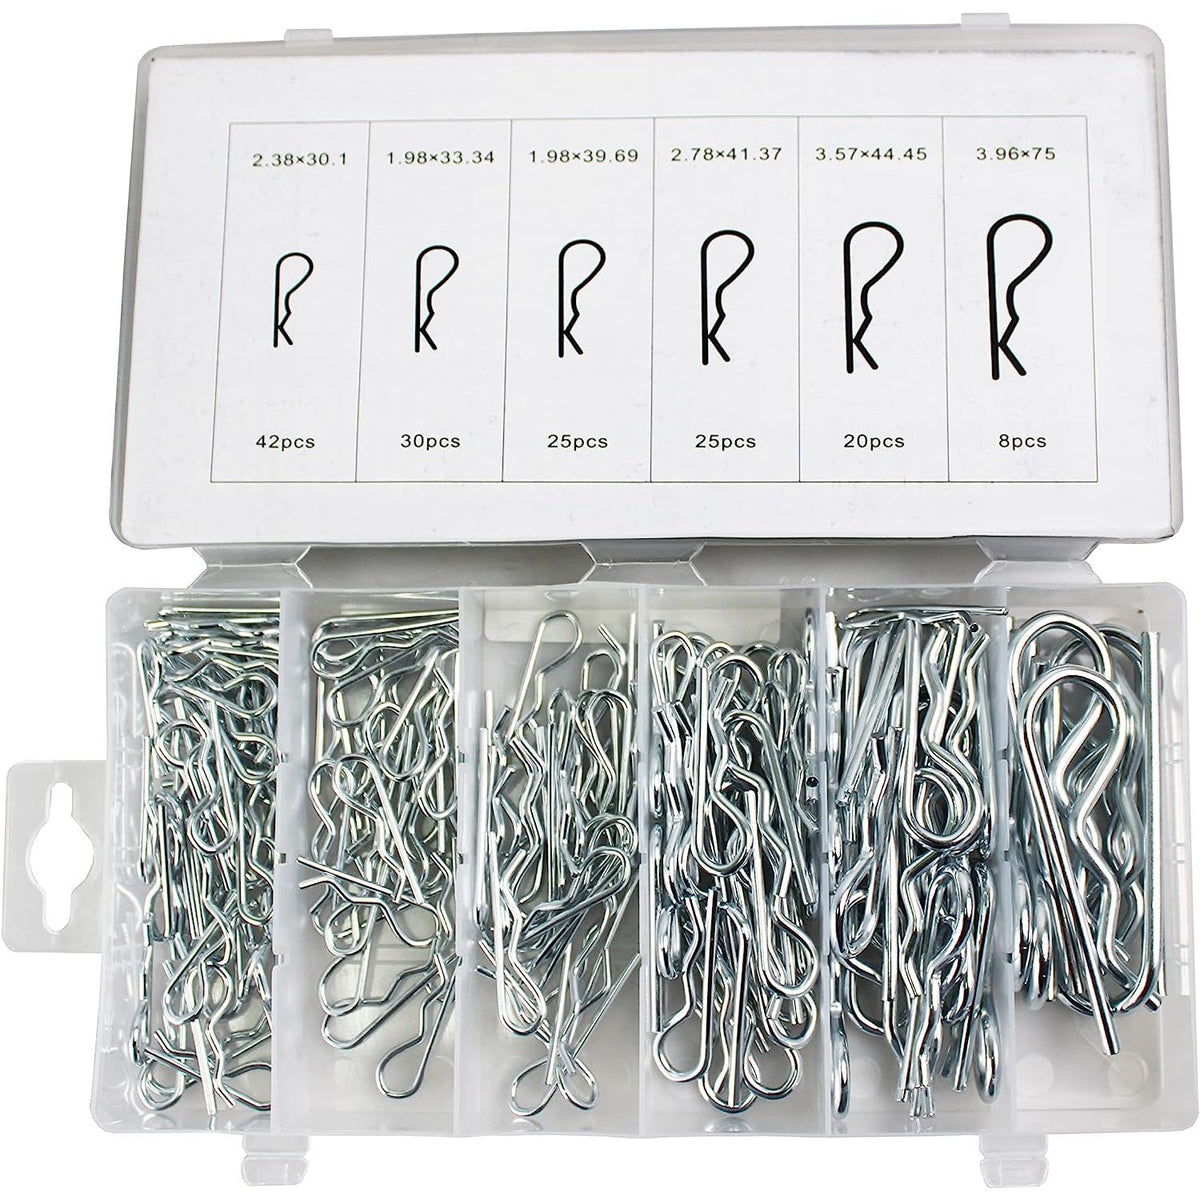 150 Piece Cotter Pin Hairpin Hitch Pin Assortment Kit South East Clearance Centre 